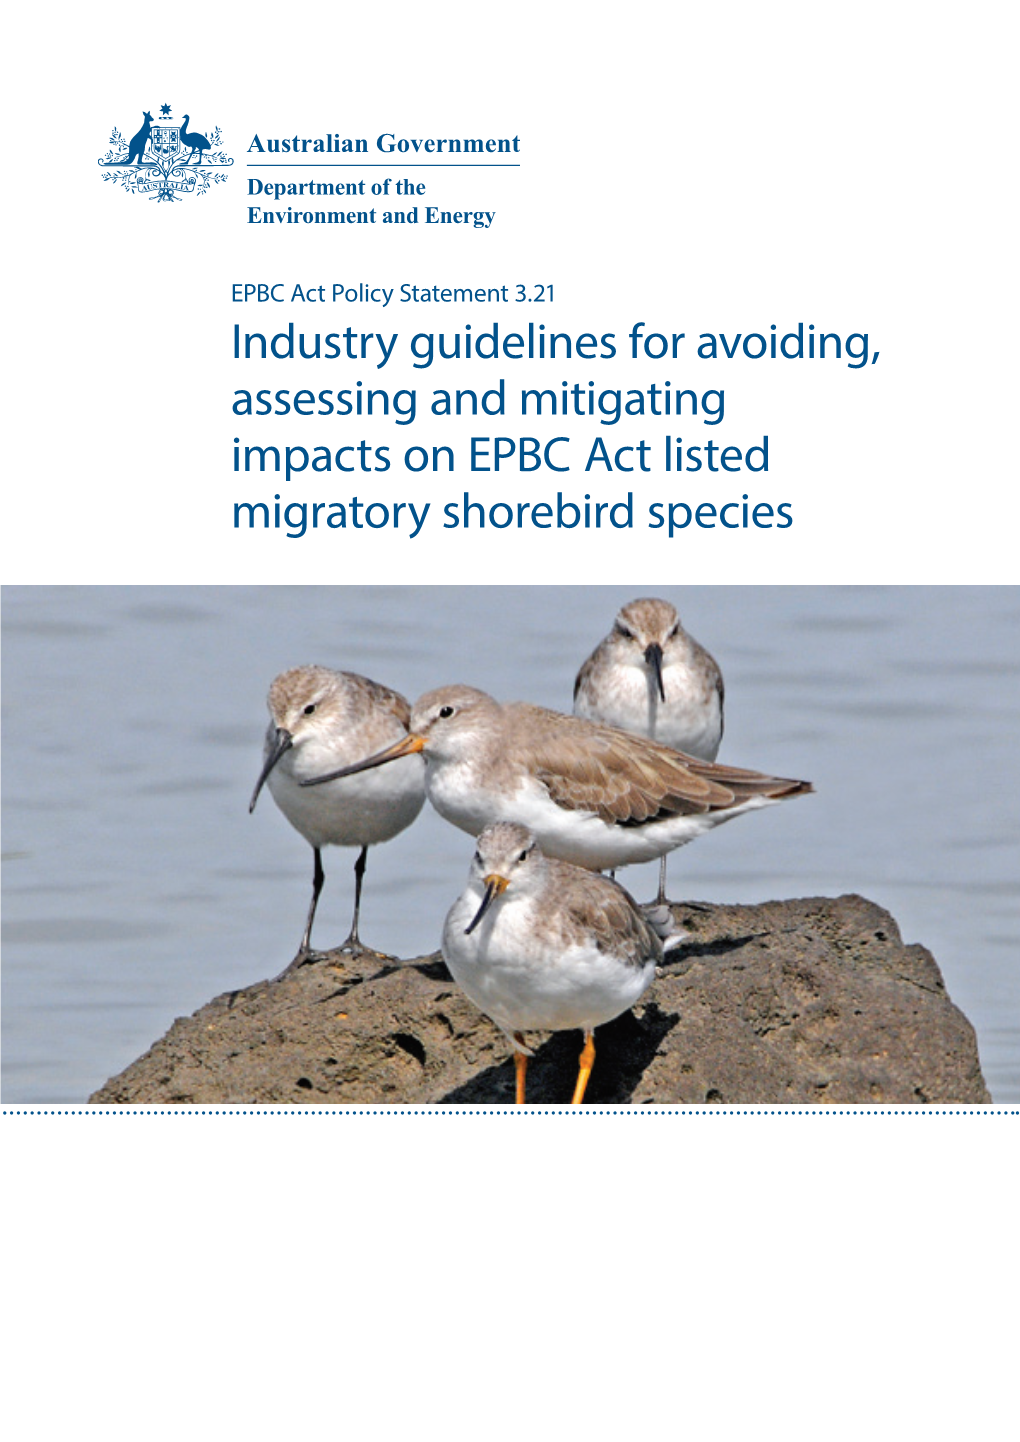 Assessing and Mitigating Impacts on EPBC Act Listed Migratory Shorebird Species © Commonwealth of Australia, 2017